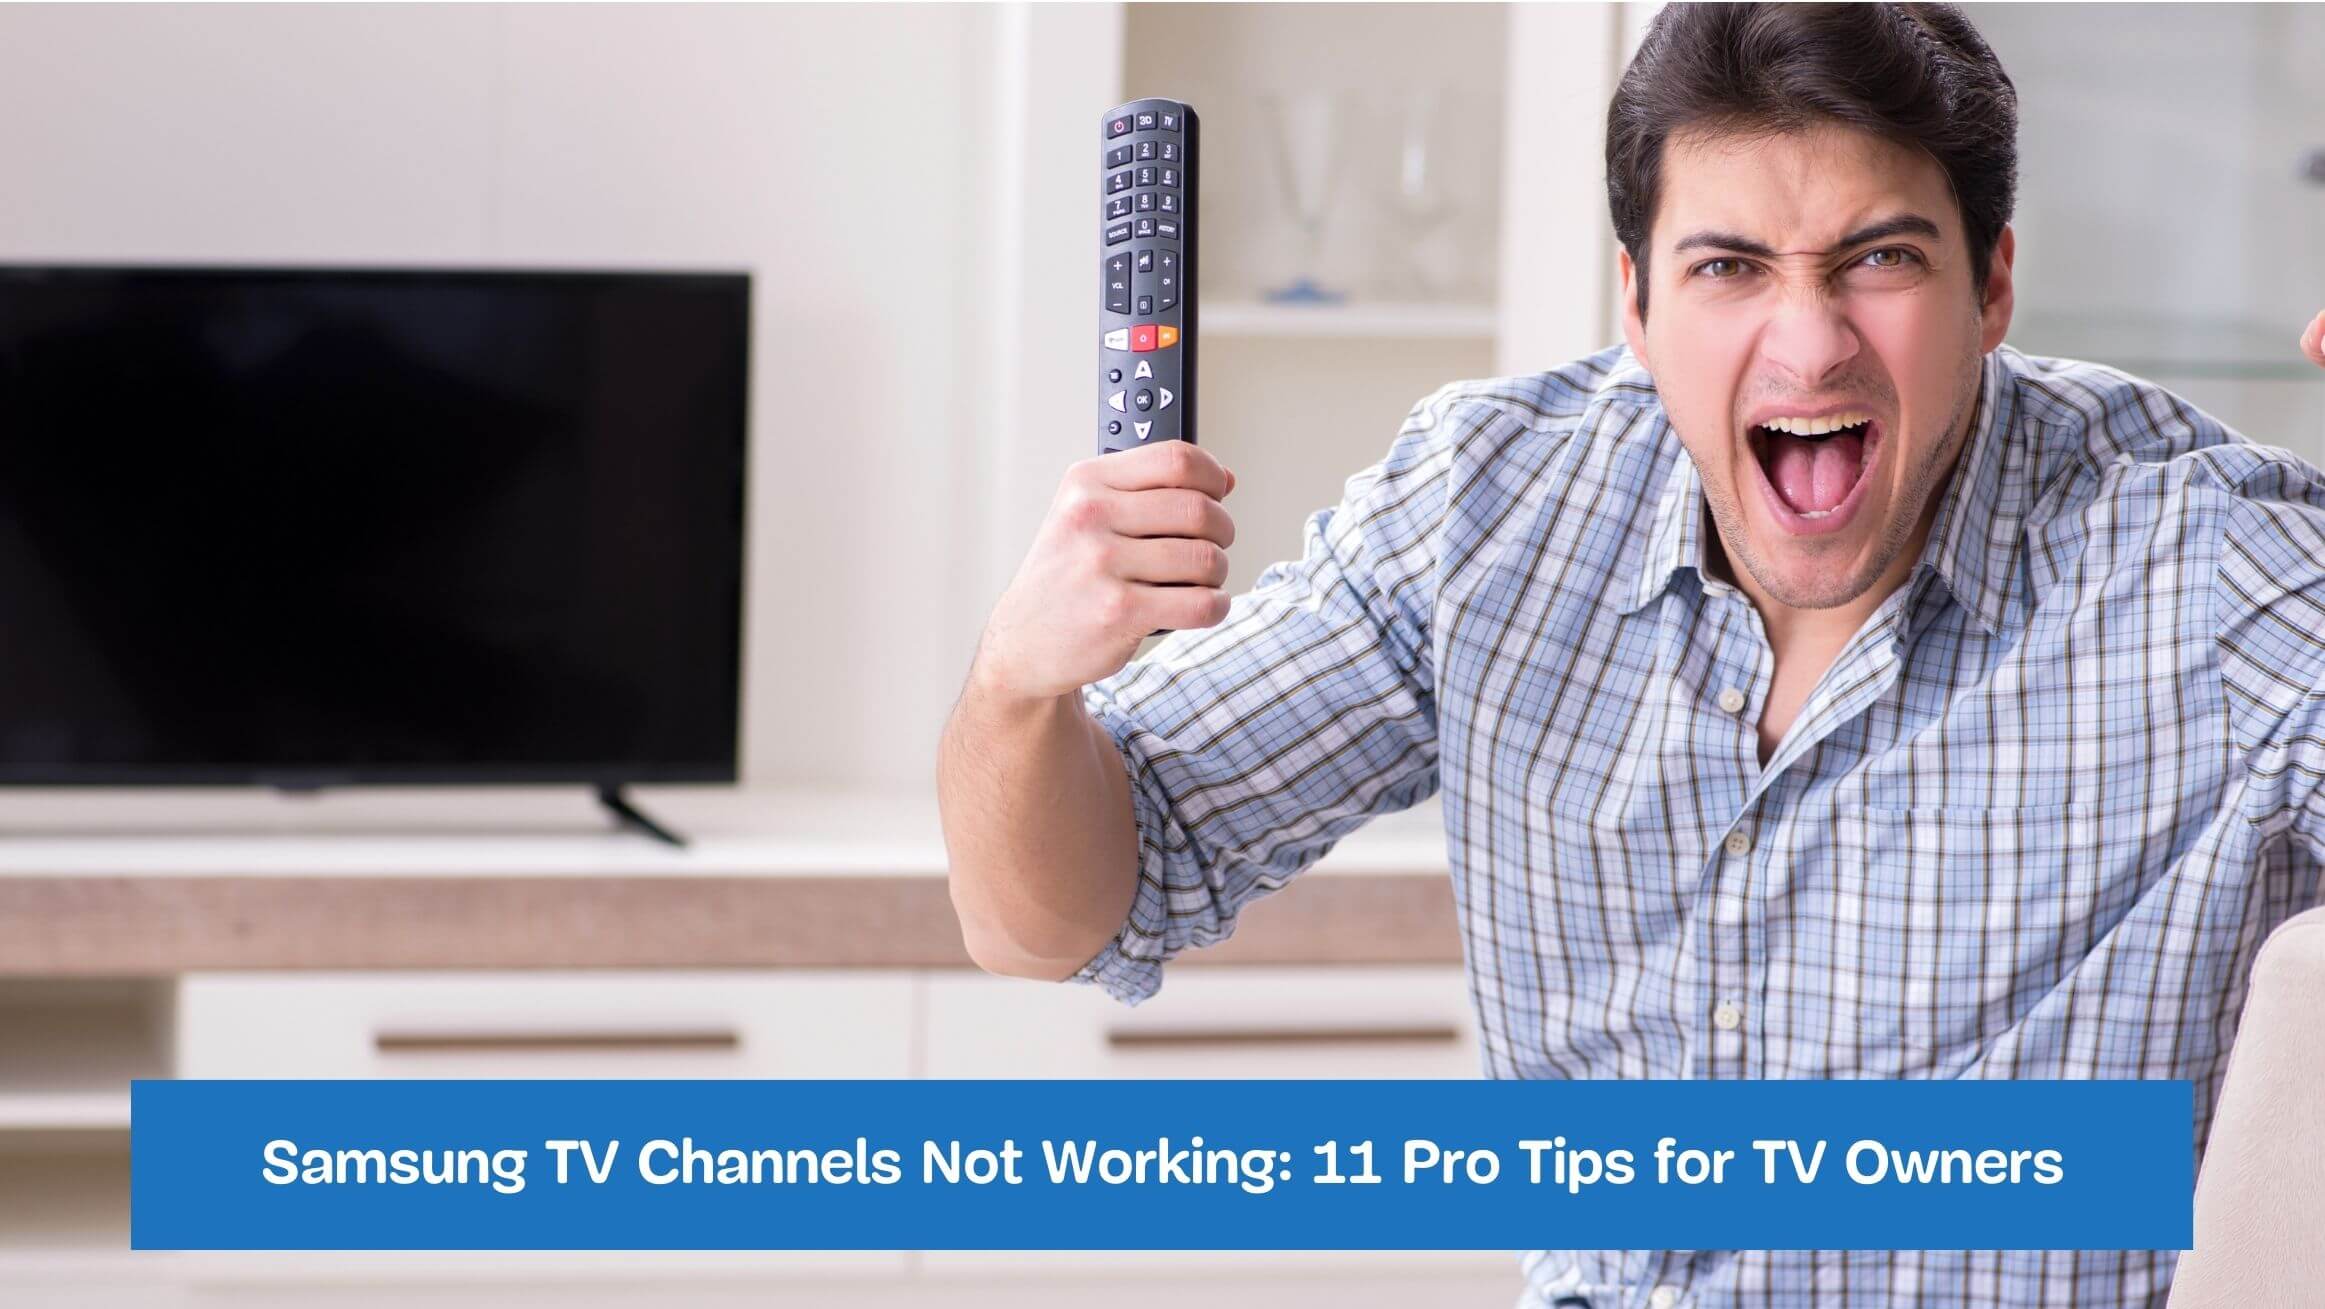 Samsung TV Channels Not Working: 11 Pro Tips for TV Owners